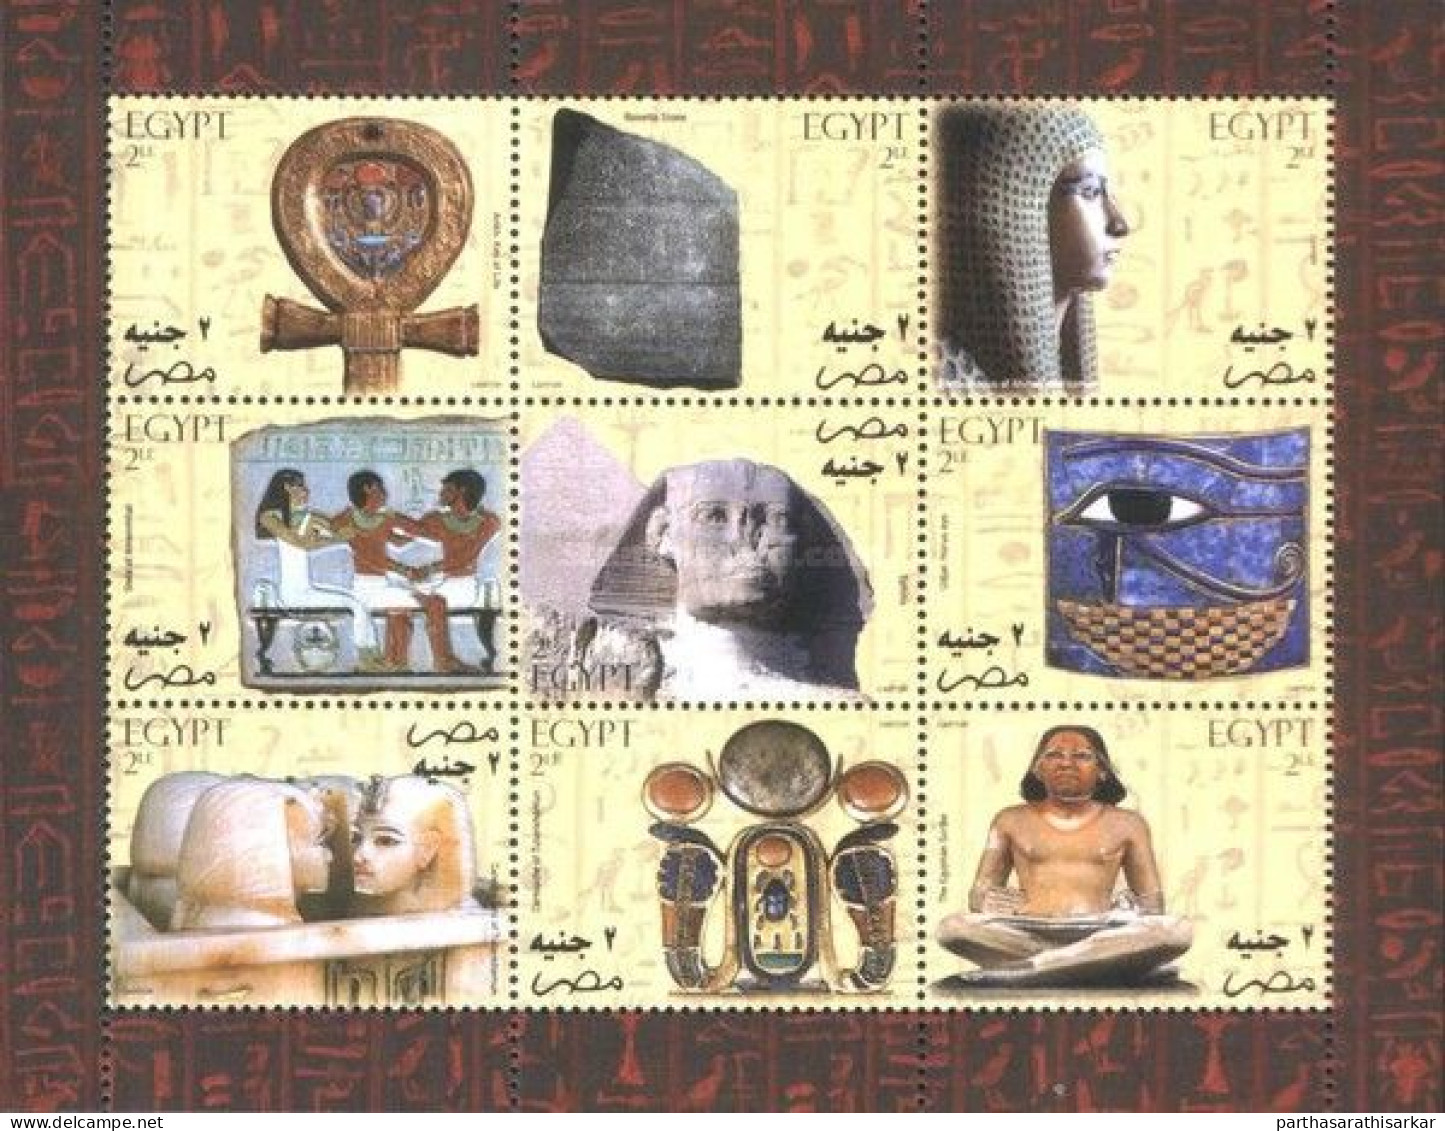 EGYPT 2004 DISCOVER THE TREASURES OF EGYPT IN STAMPS GOLD FOIL STAMP BOOKLET UNUSUAL RARE MNH - Ongebruikt